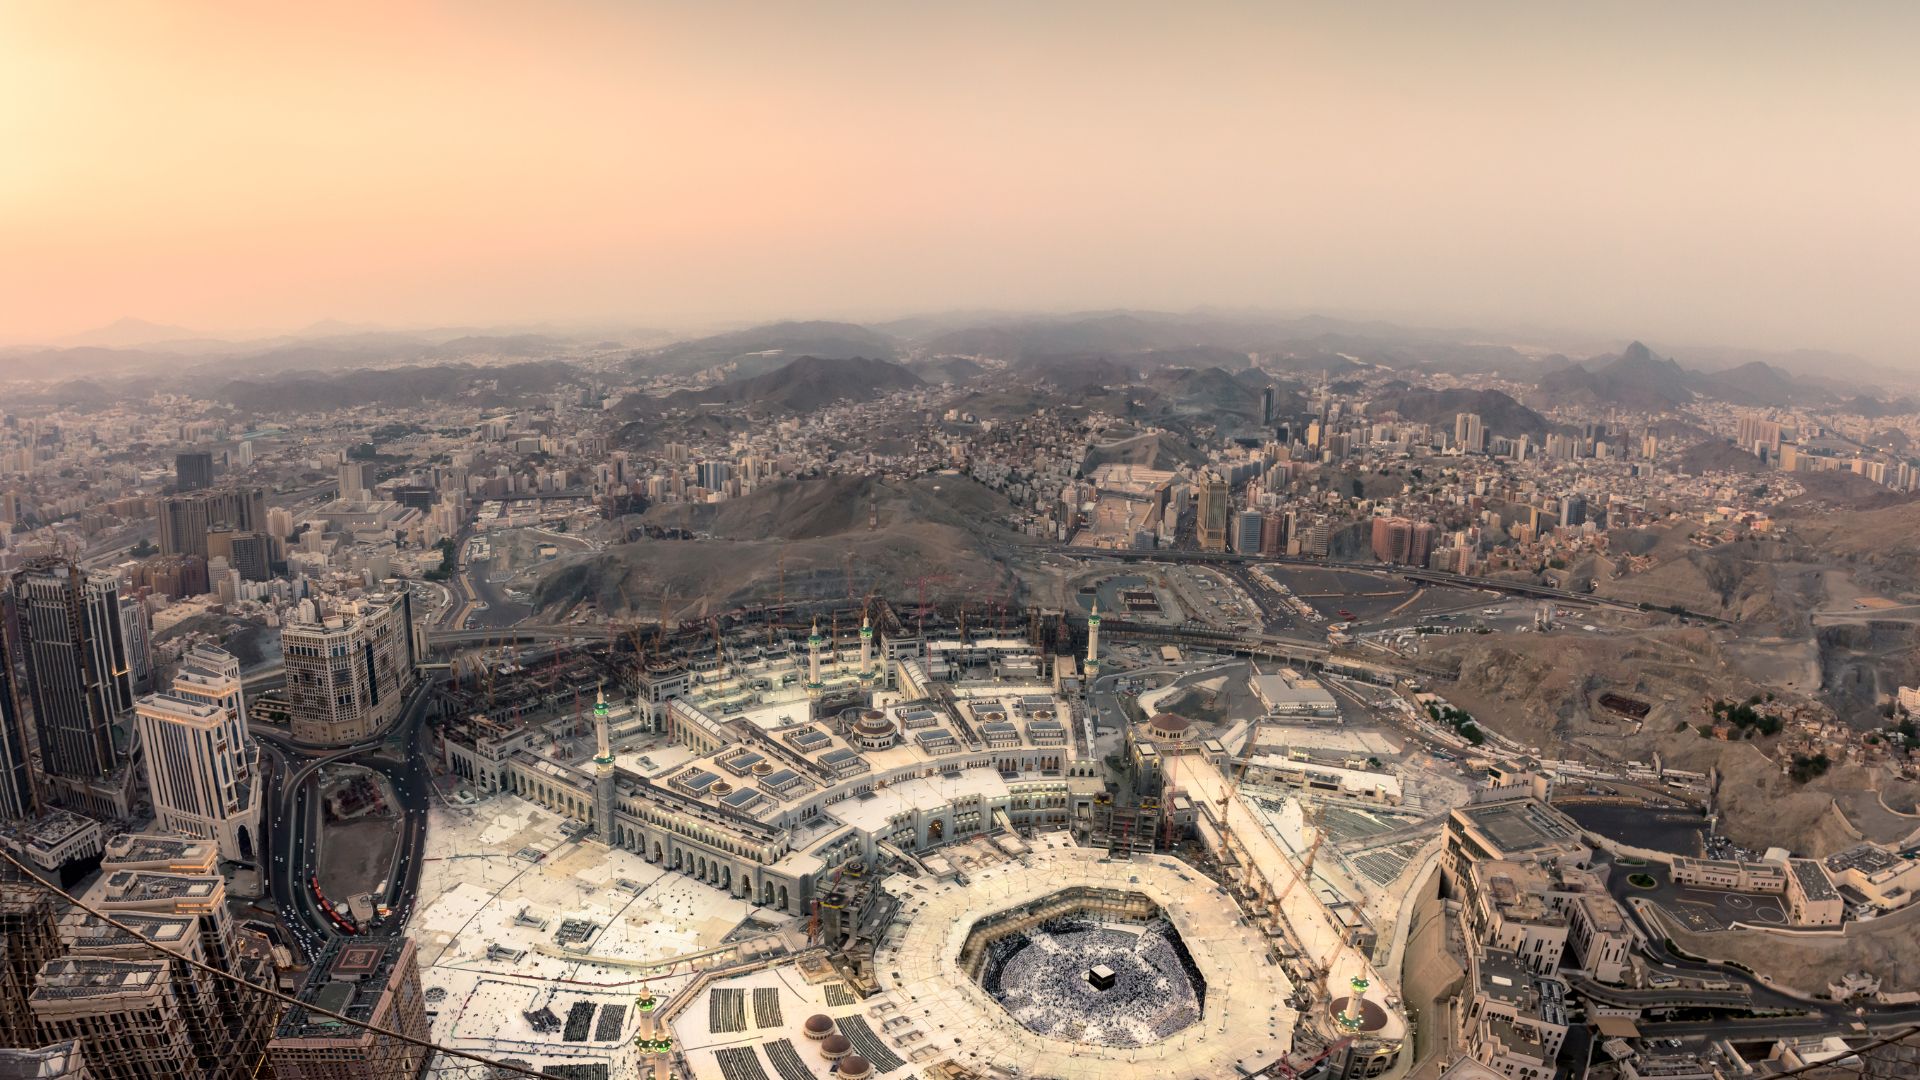 Why Does God Swear by the Sacred City of Makkah? [Video]